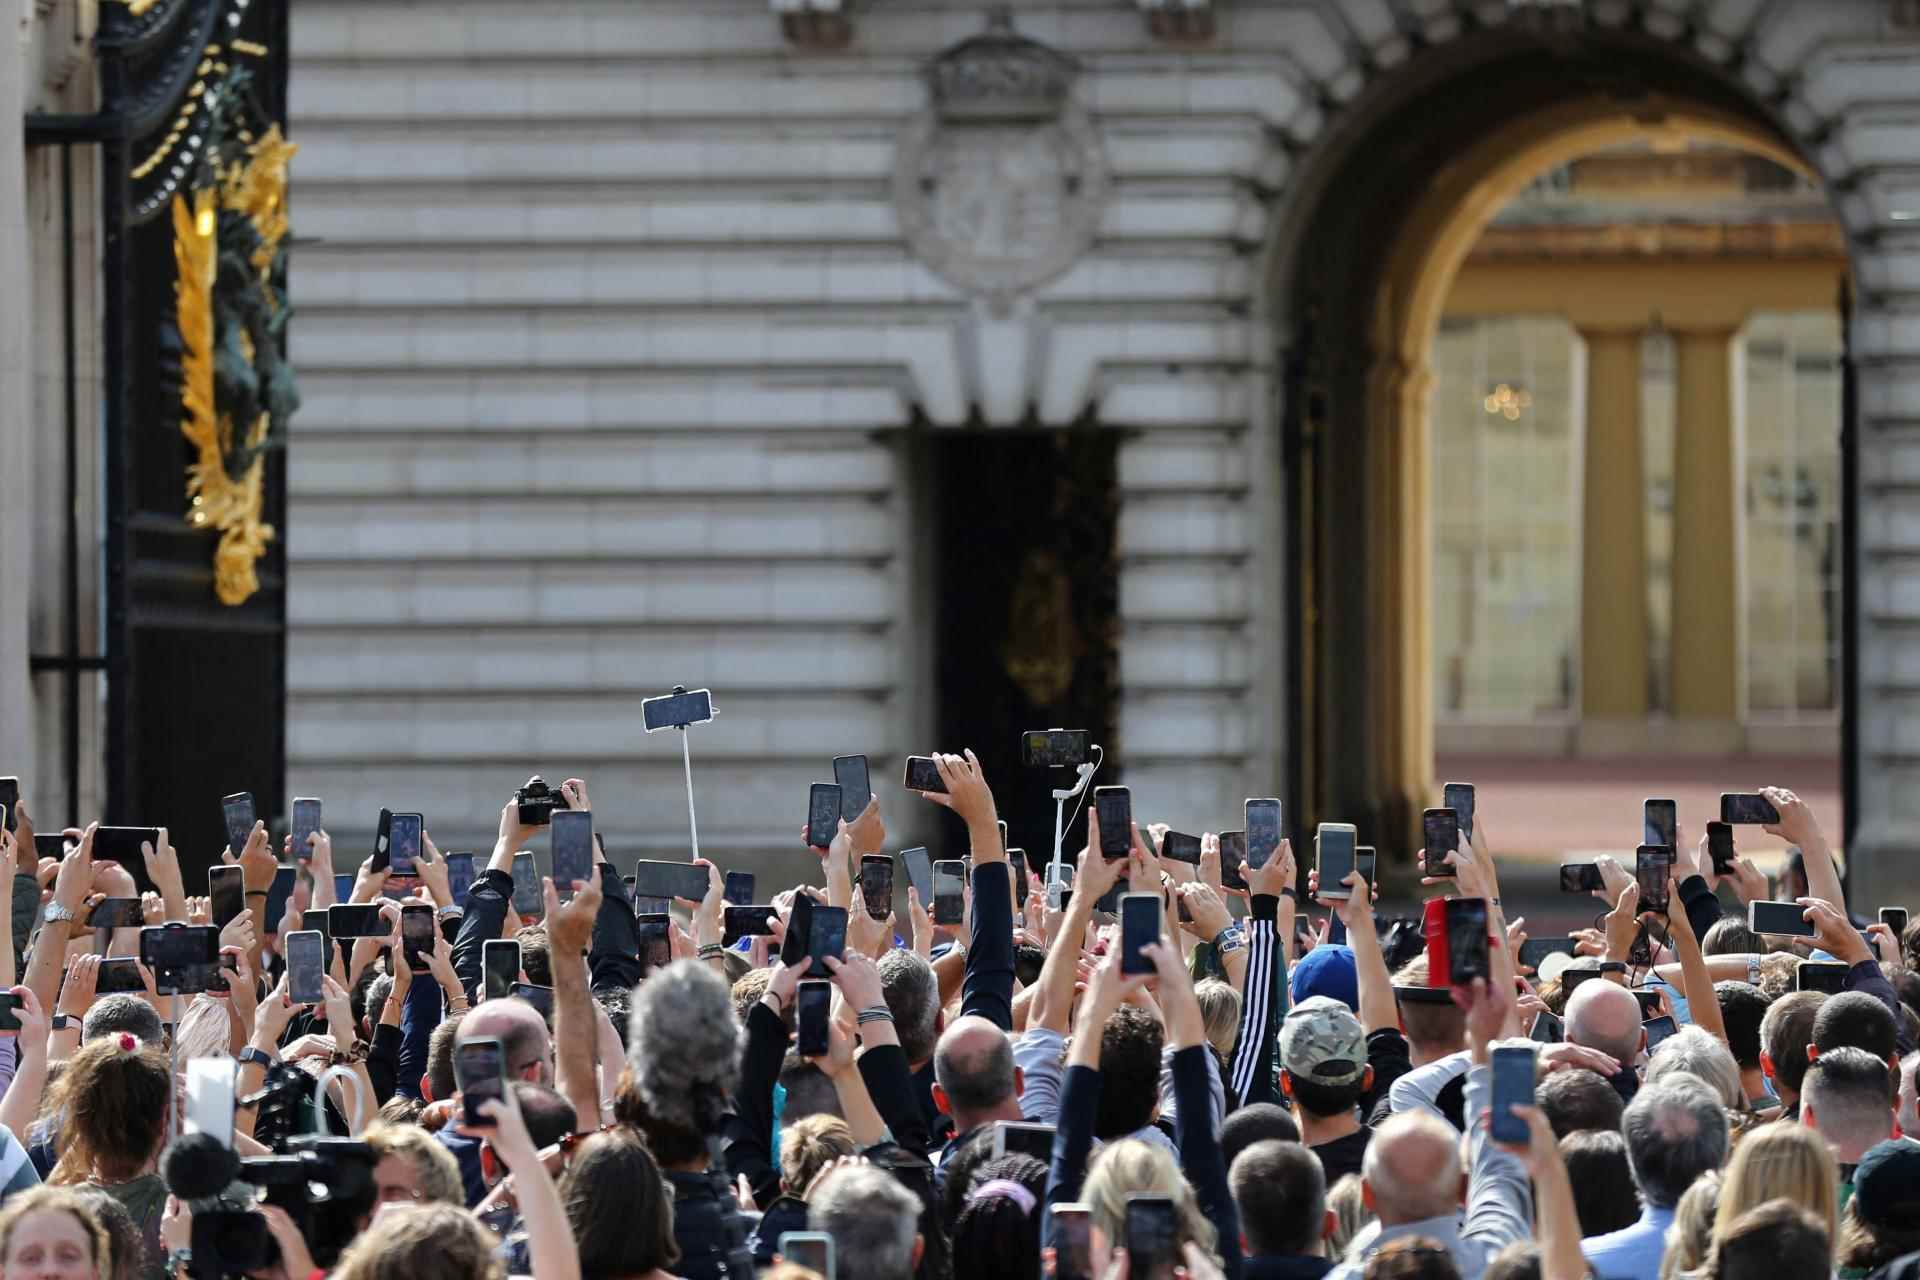 Crowds wait for King Charles III, outside Buckingham Palace in London, September 9, 2022.